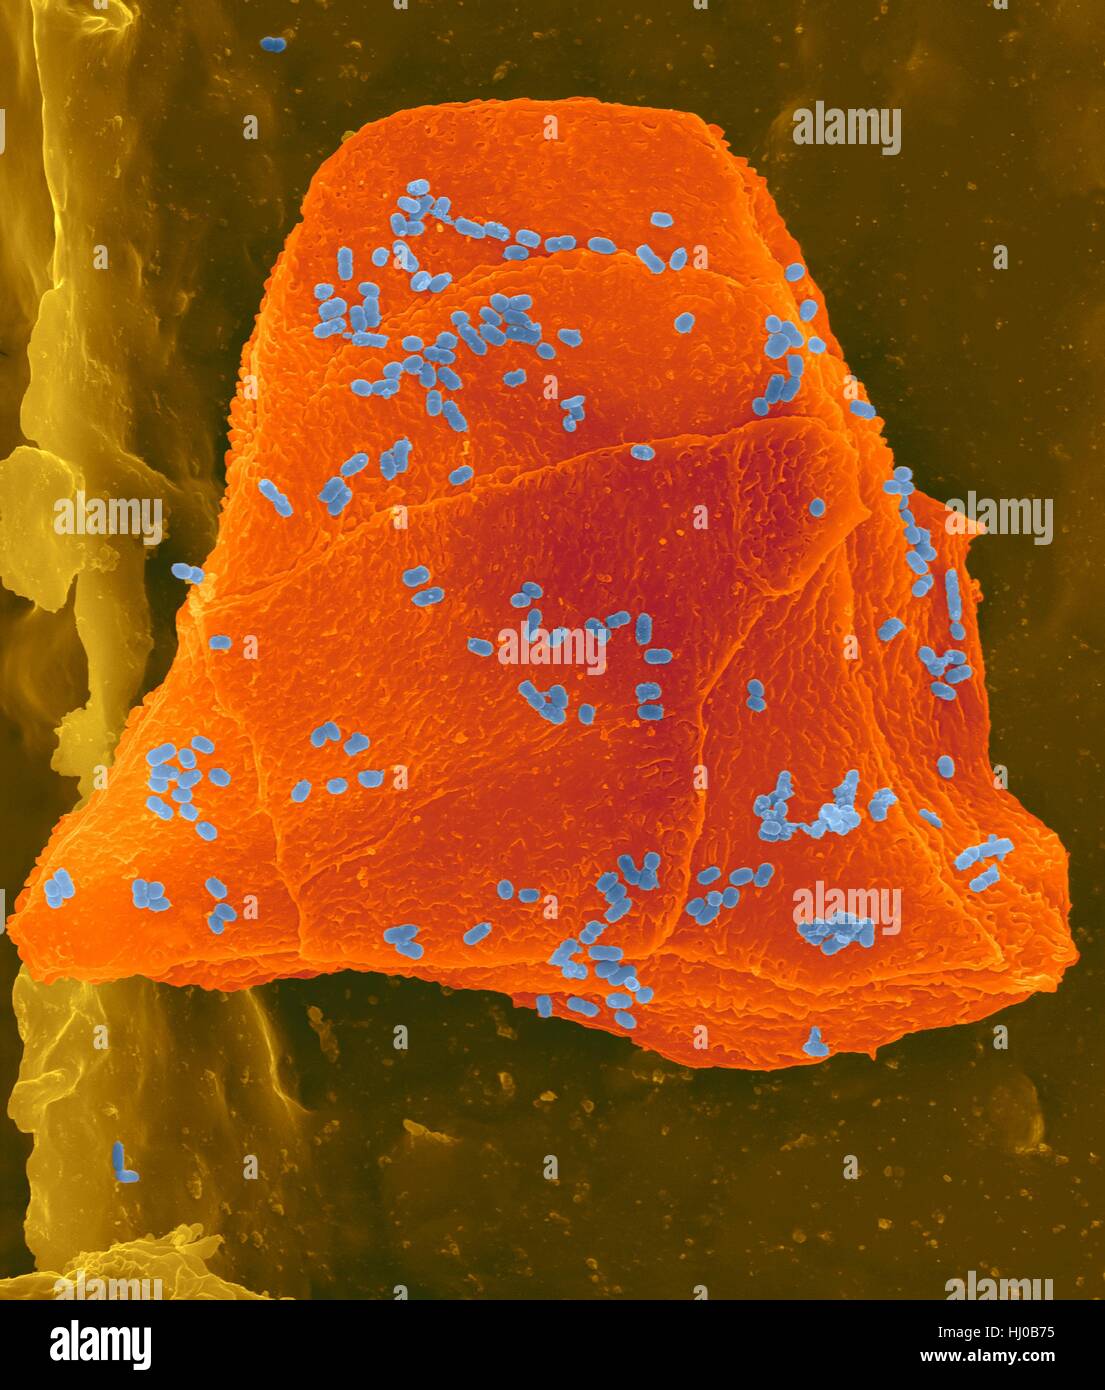 Used wax dental floss with cheek cells (orange) bacteria (blue) on dental floss fibres (brown),coloured scanning electron micrograph (SEM).Cheek cells often get scraped from inside of your mouth when flossing your teeth.Numerous bacteria are present as part of normal mouth flora.Bacterial plaque Stock Photo